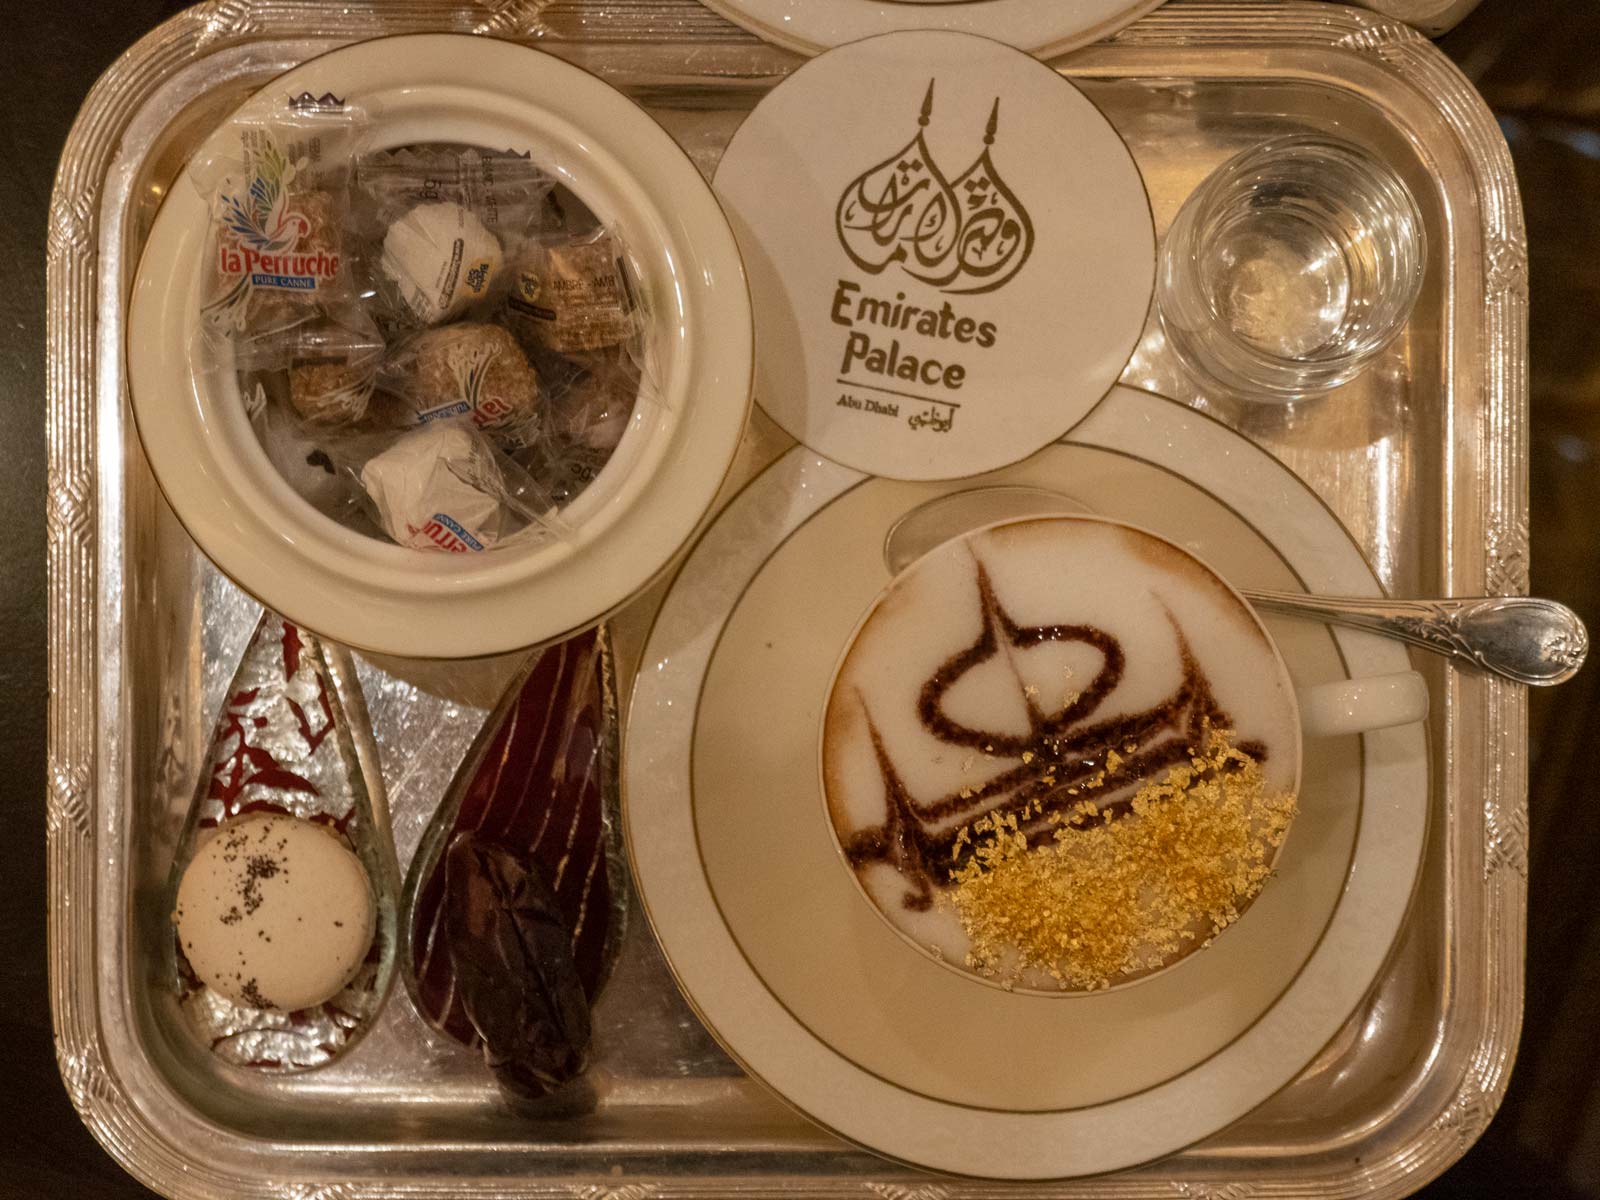 Gold flake cappuccino from Le Cafe inside Emirates Palace Abu Dhabi